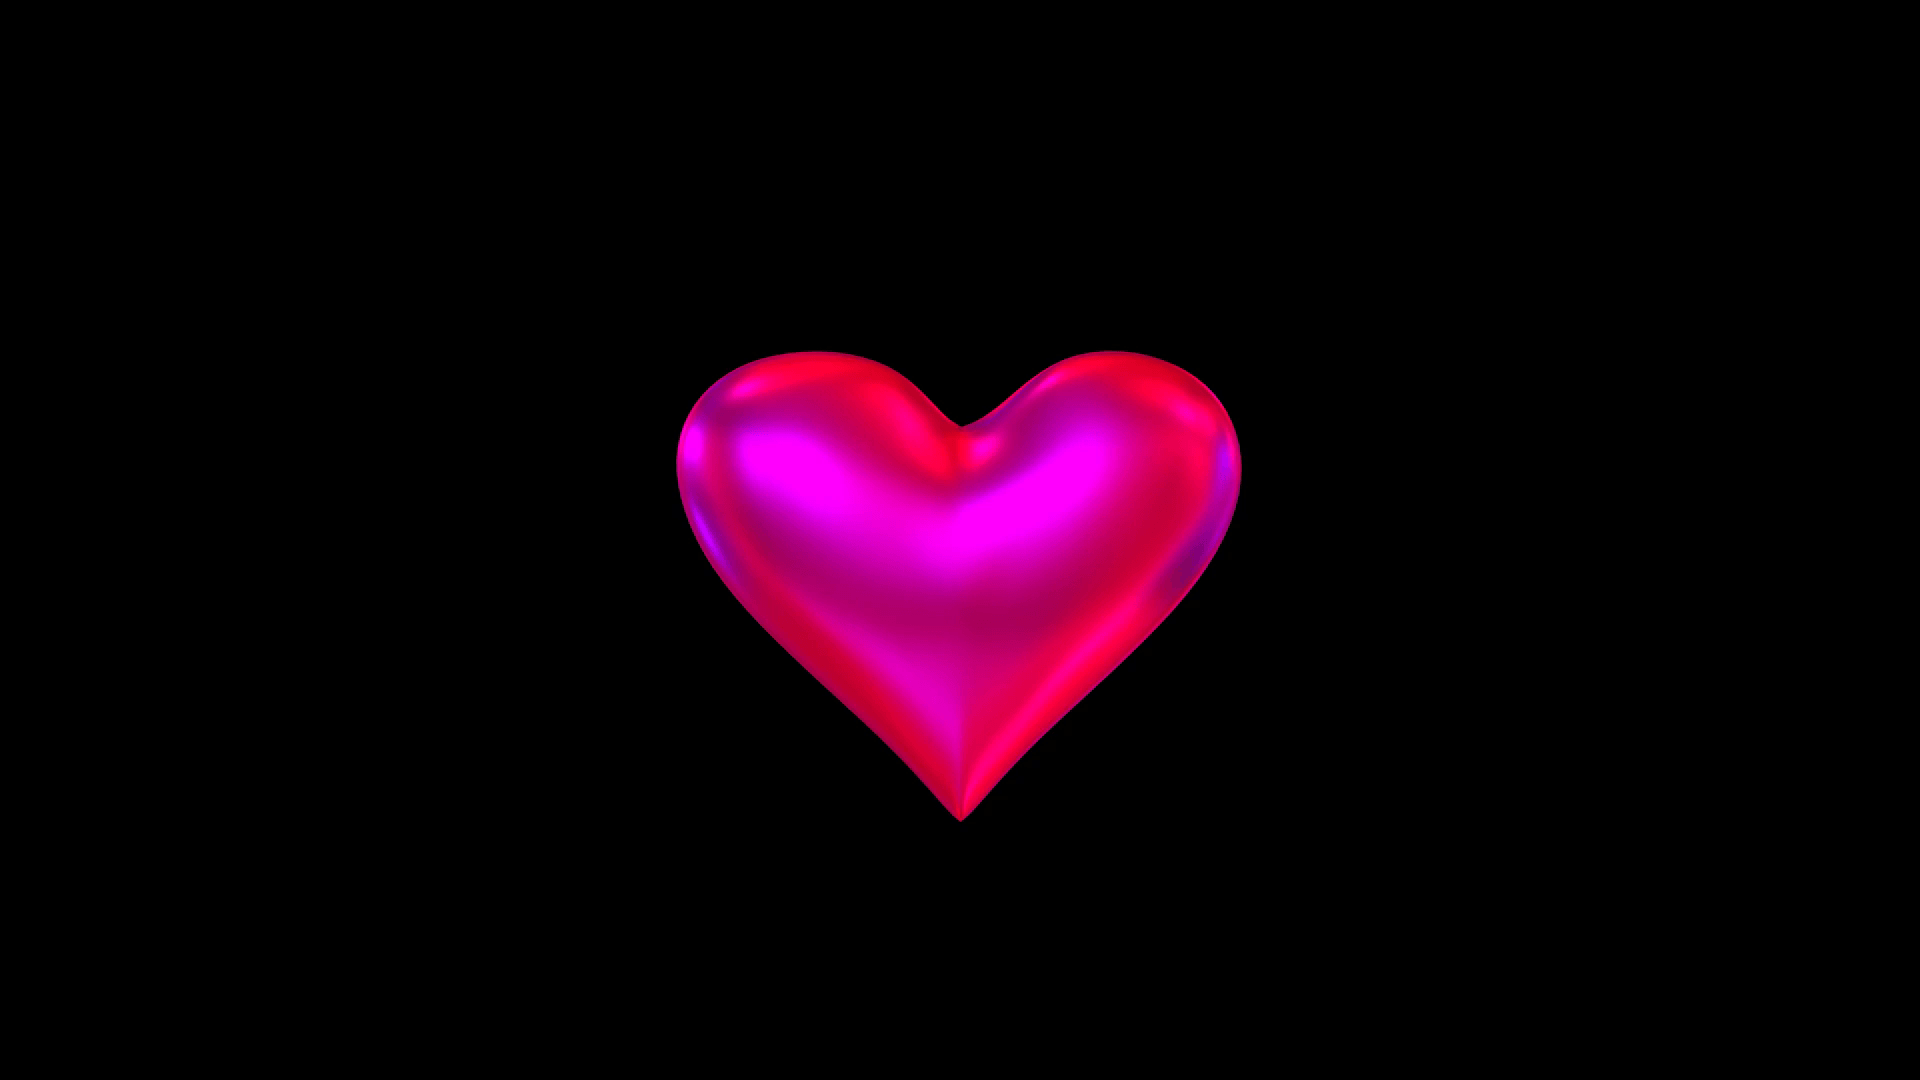 Animated dissolving pink heart. All particles are made of tiny